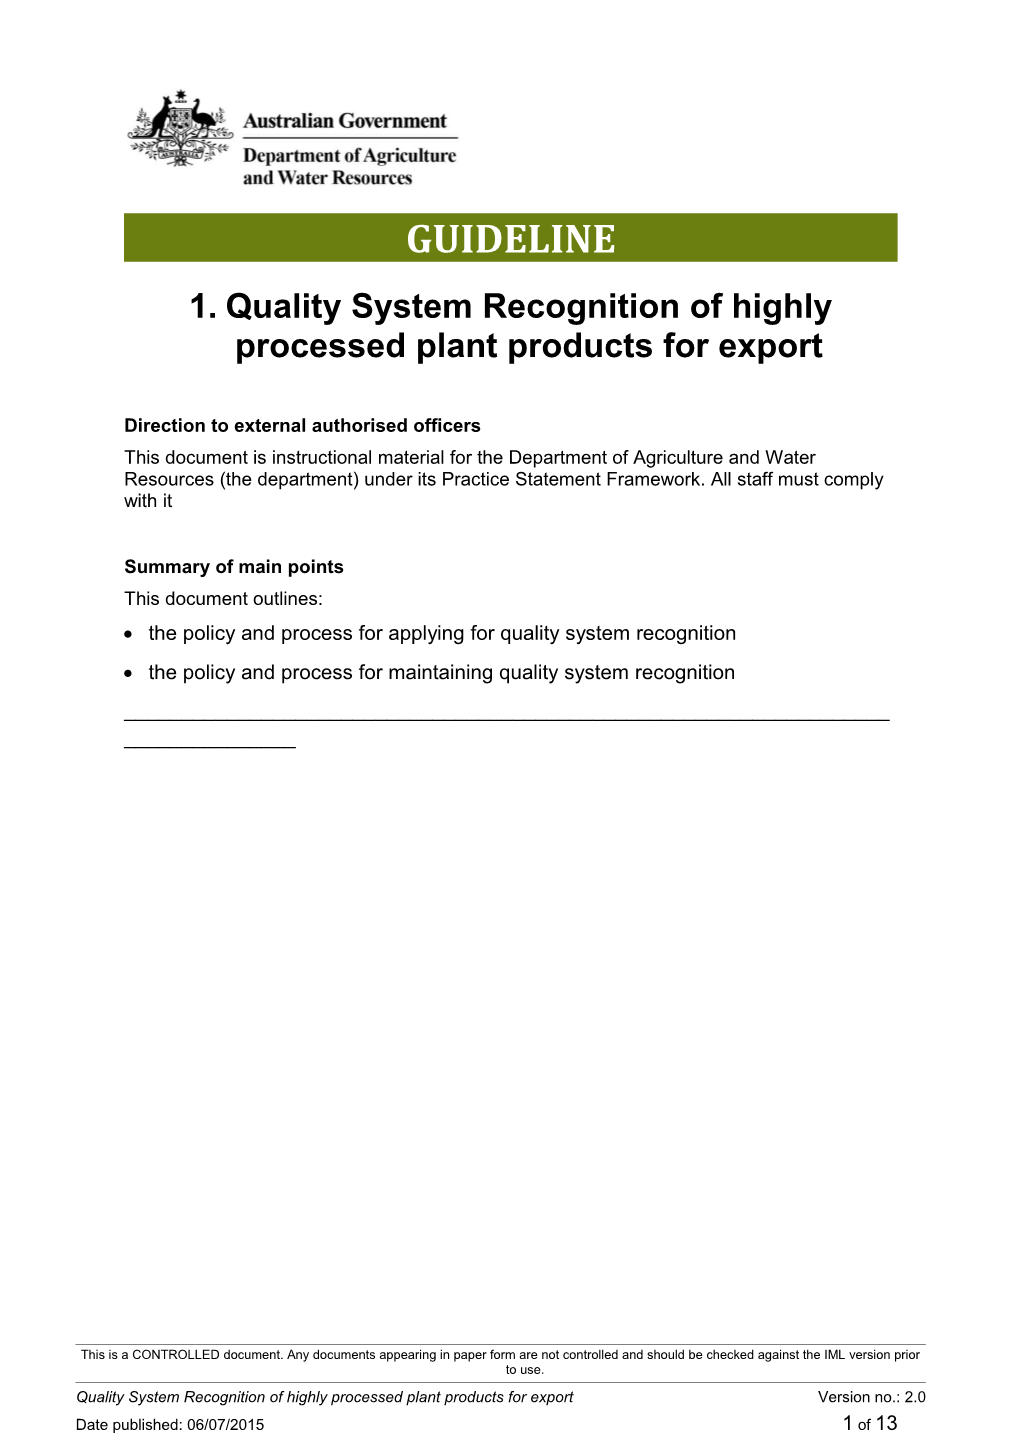 Quality System Recognition of Highly Processed Plant Products for Export